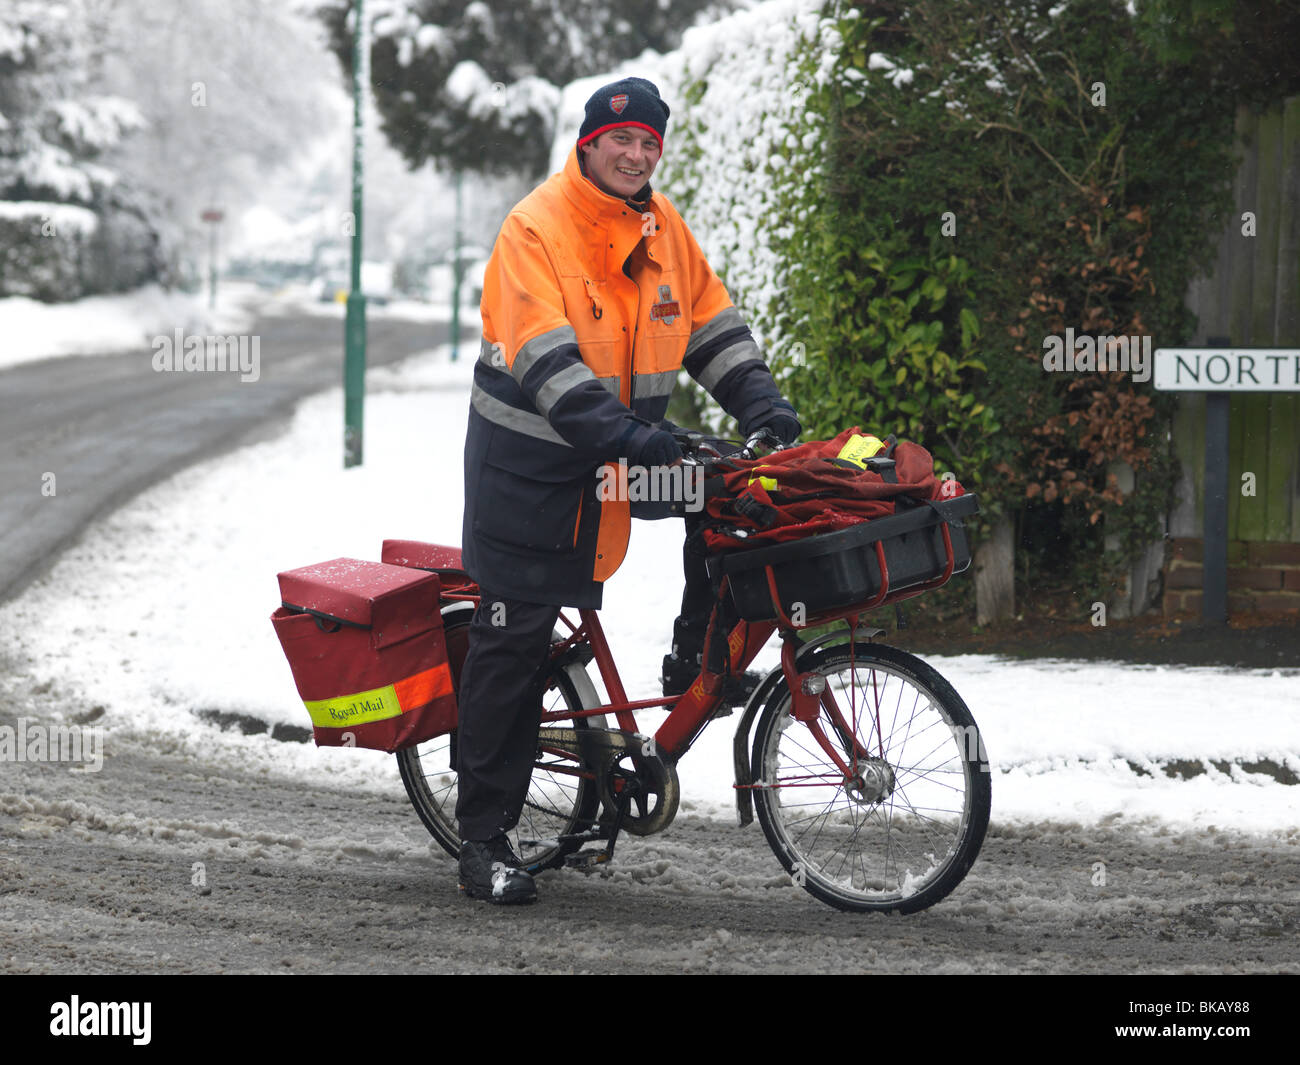 Postman On Bicycle In The Snow Surrey England Stock Photo